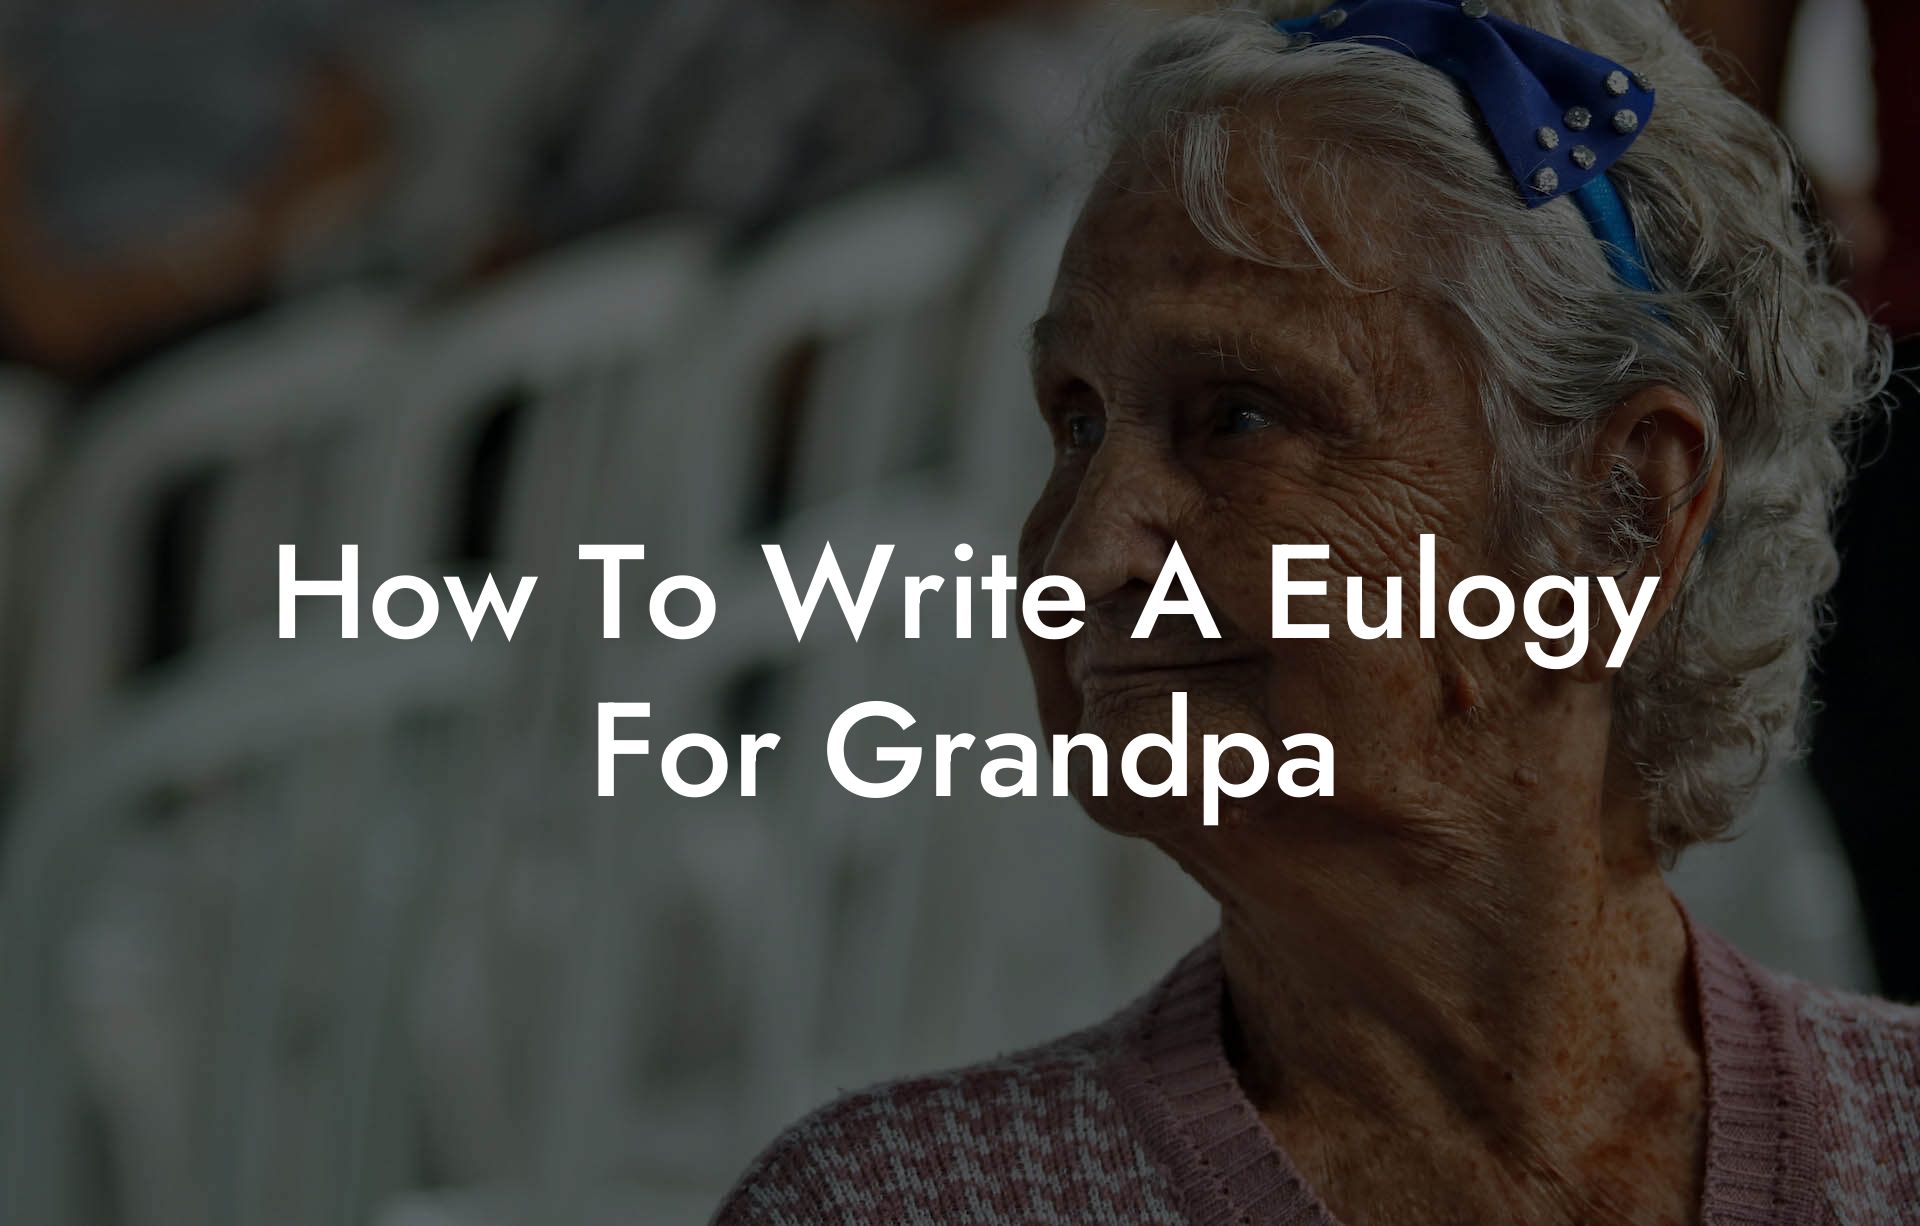 How To Write A Eulogy For Grandpa